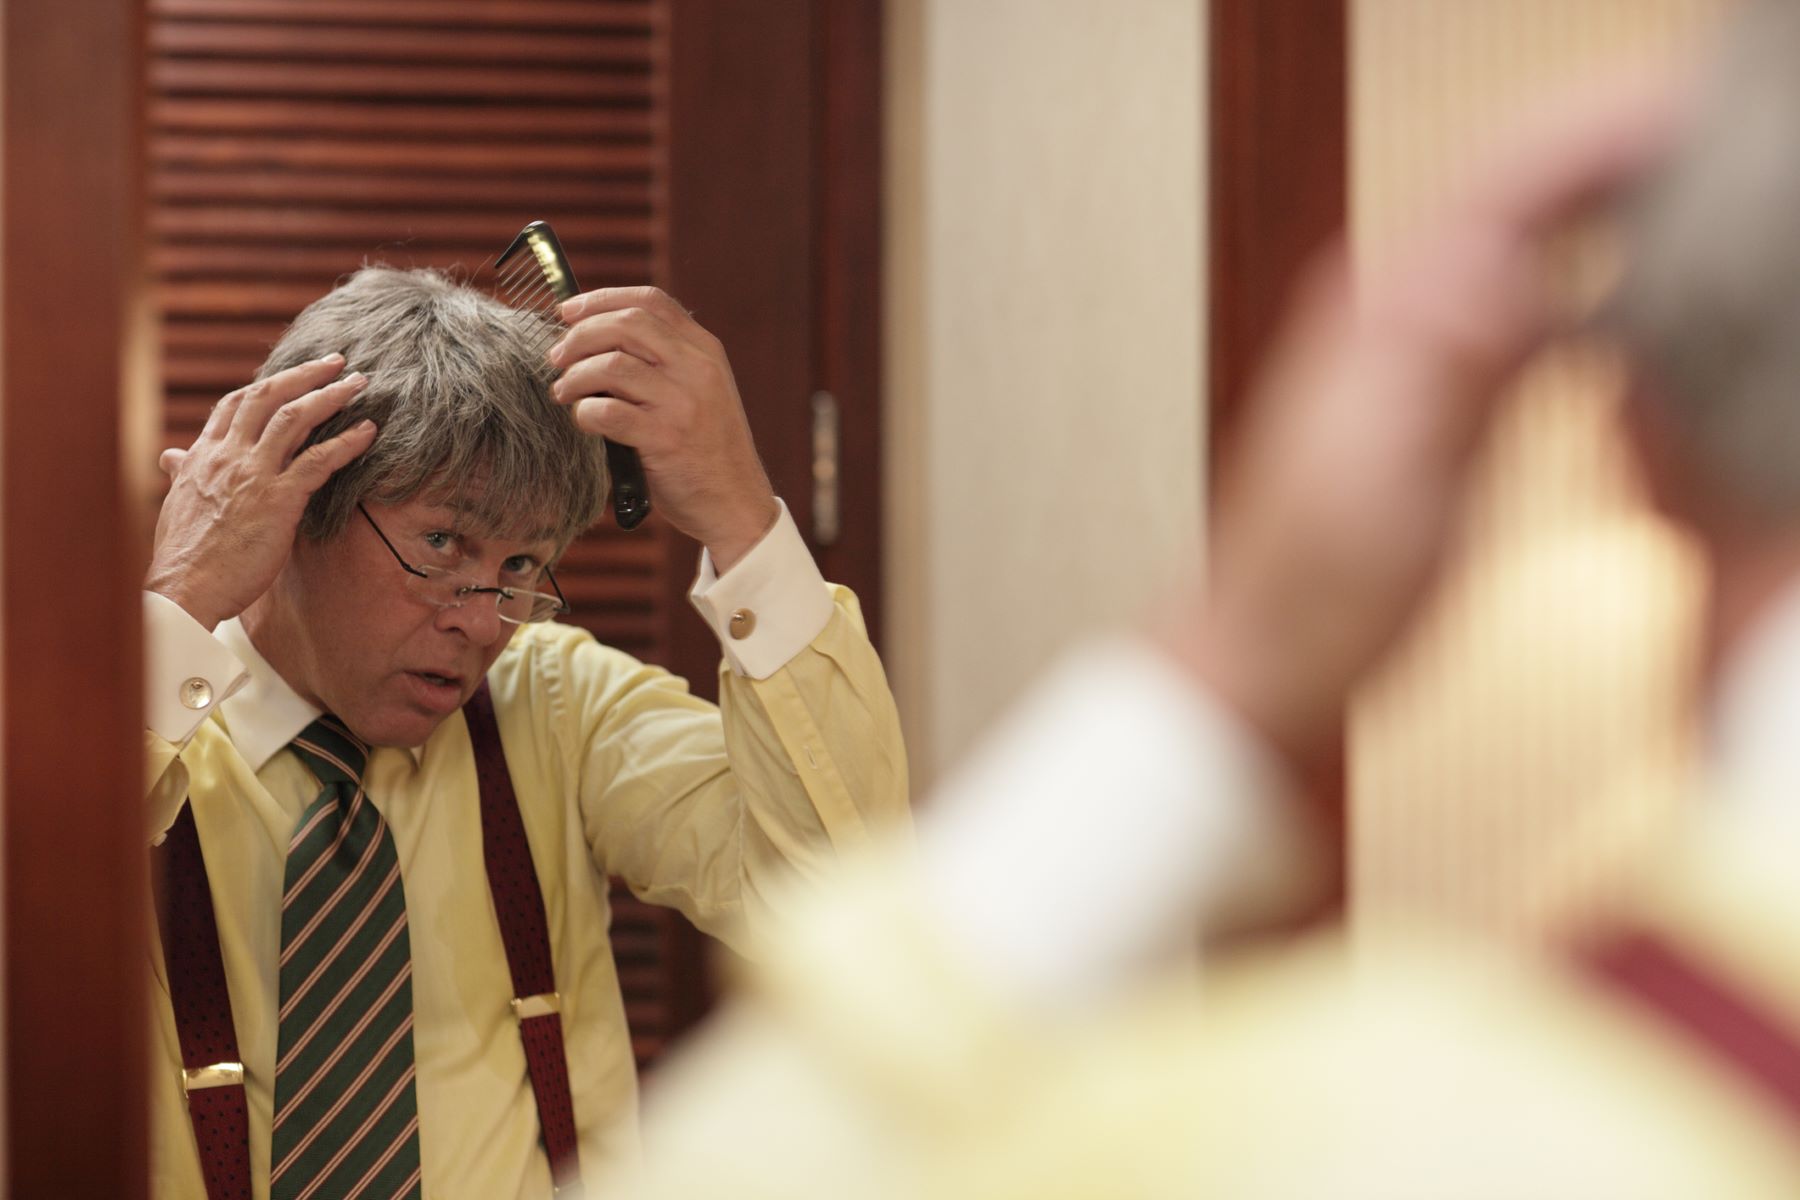 Man adjusting his hair replacement system